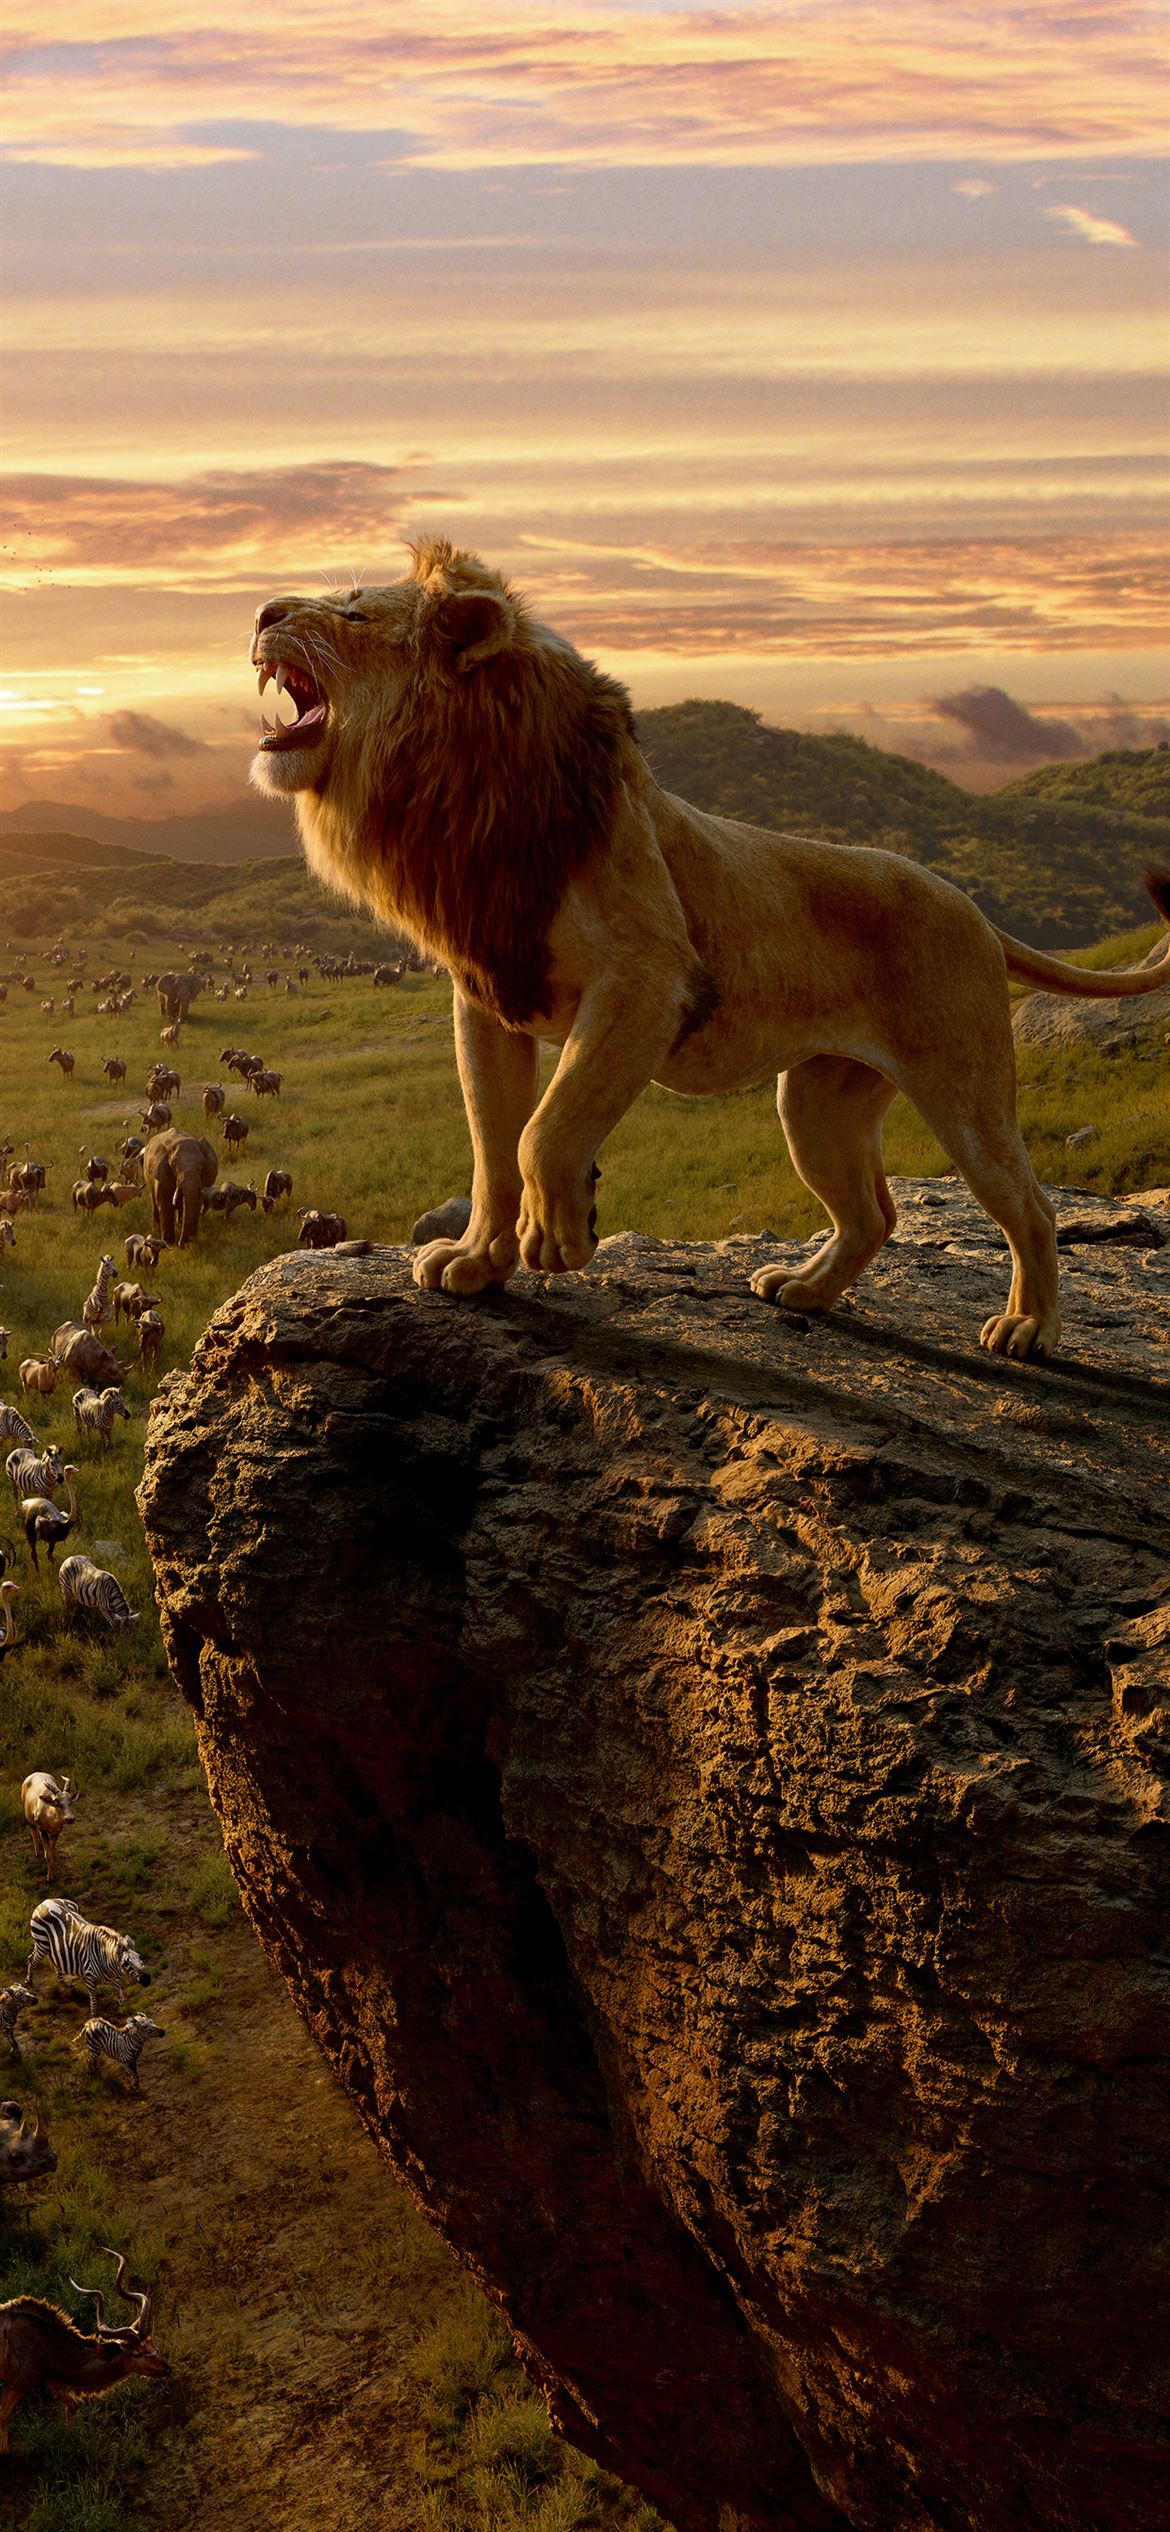 The Lion King download the last version for iphone